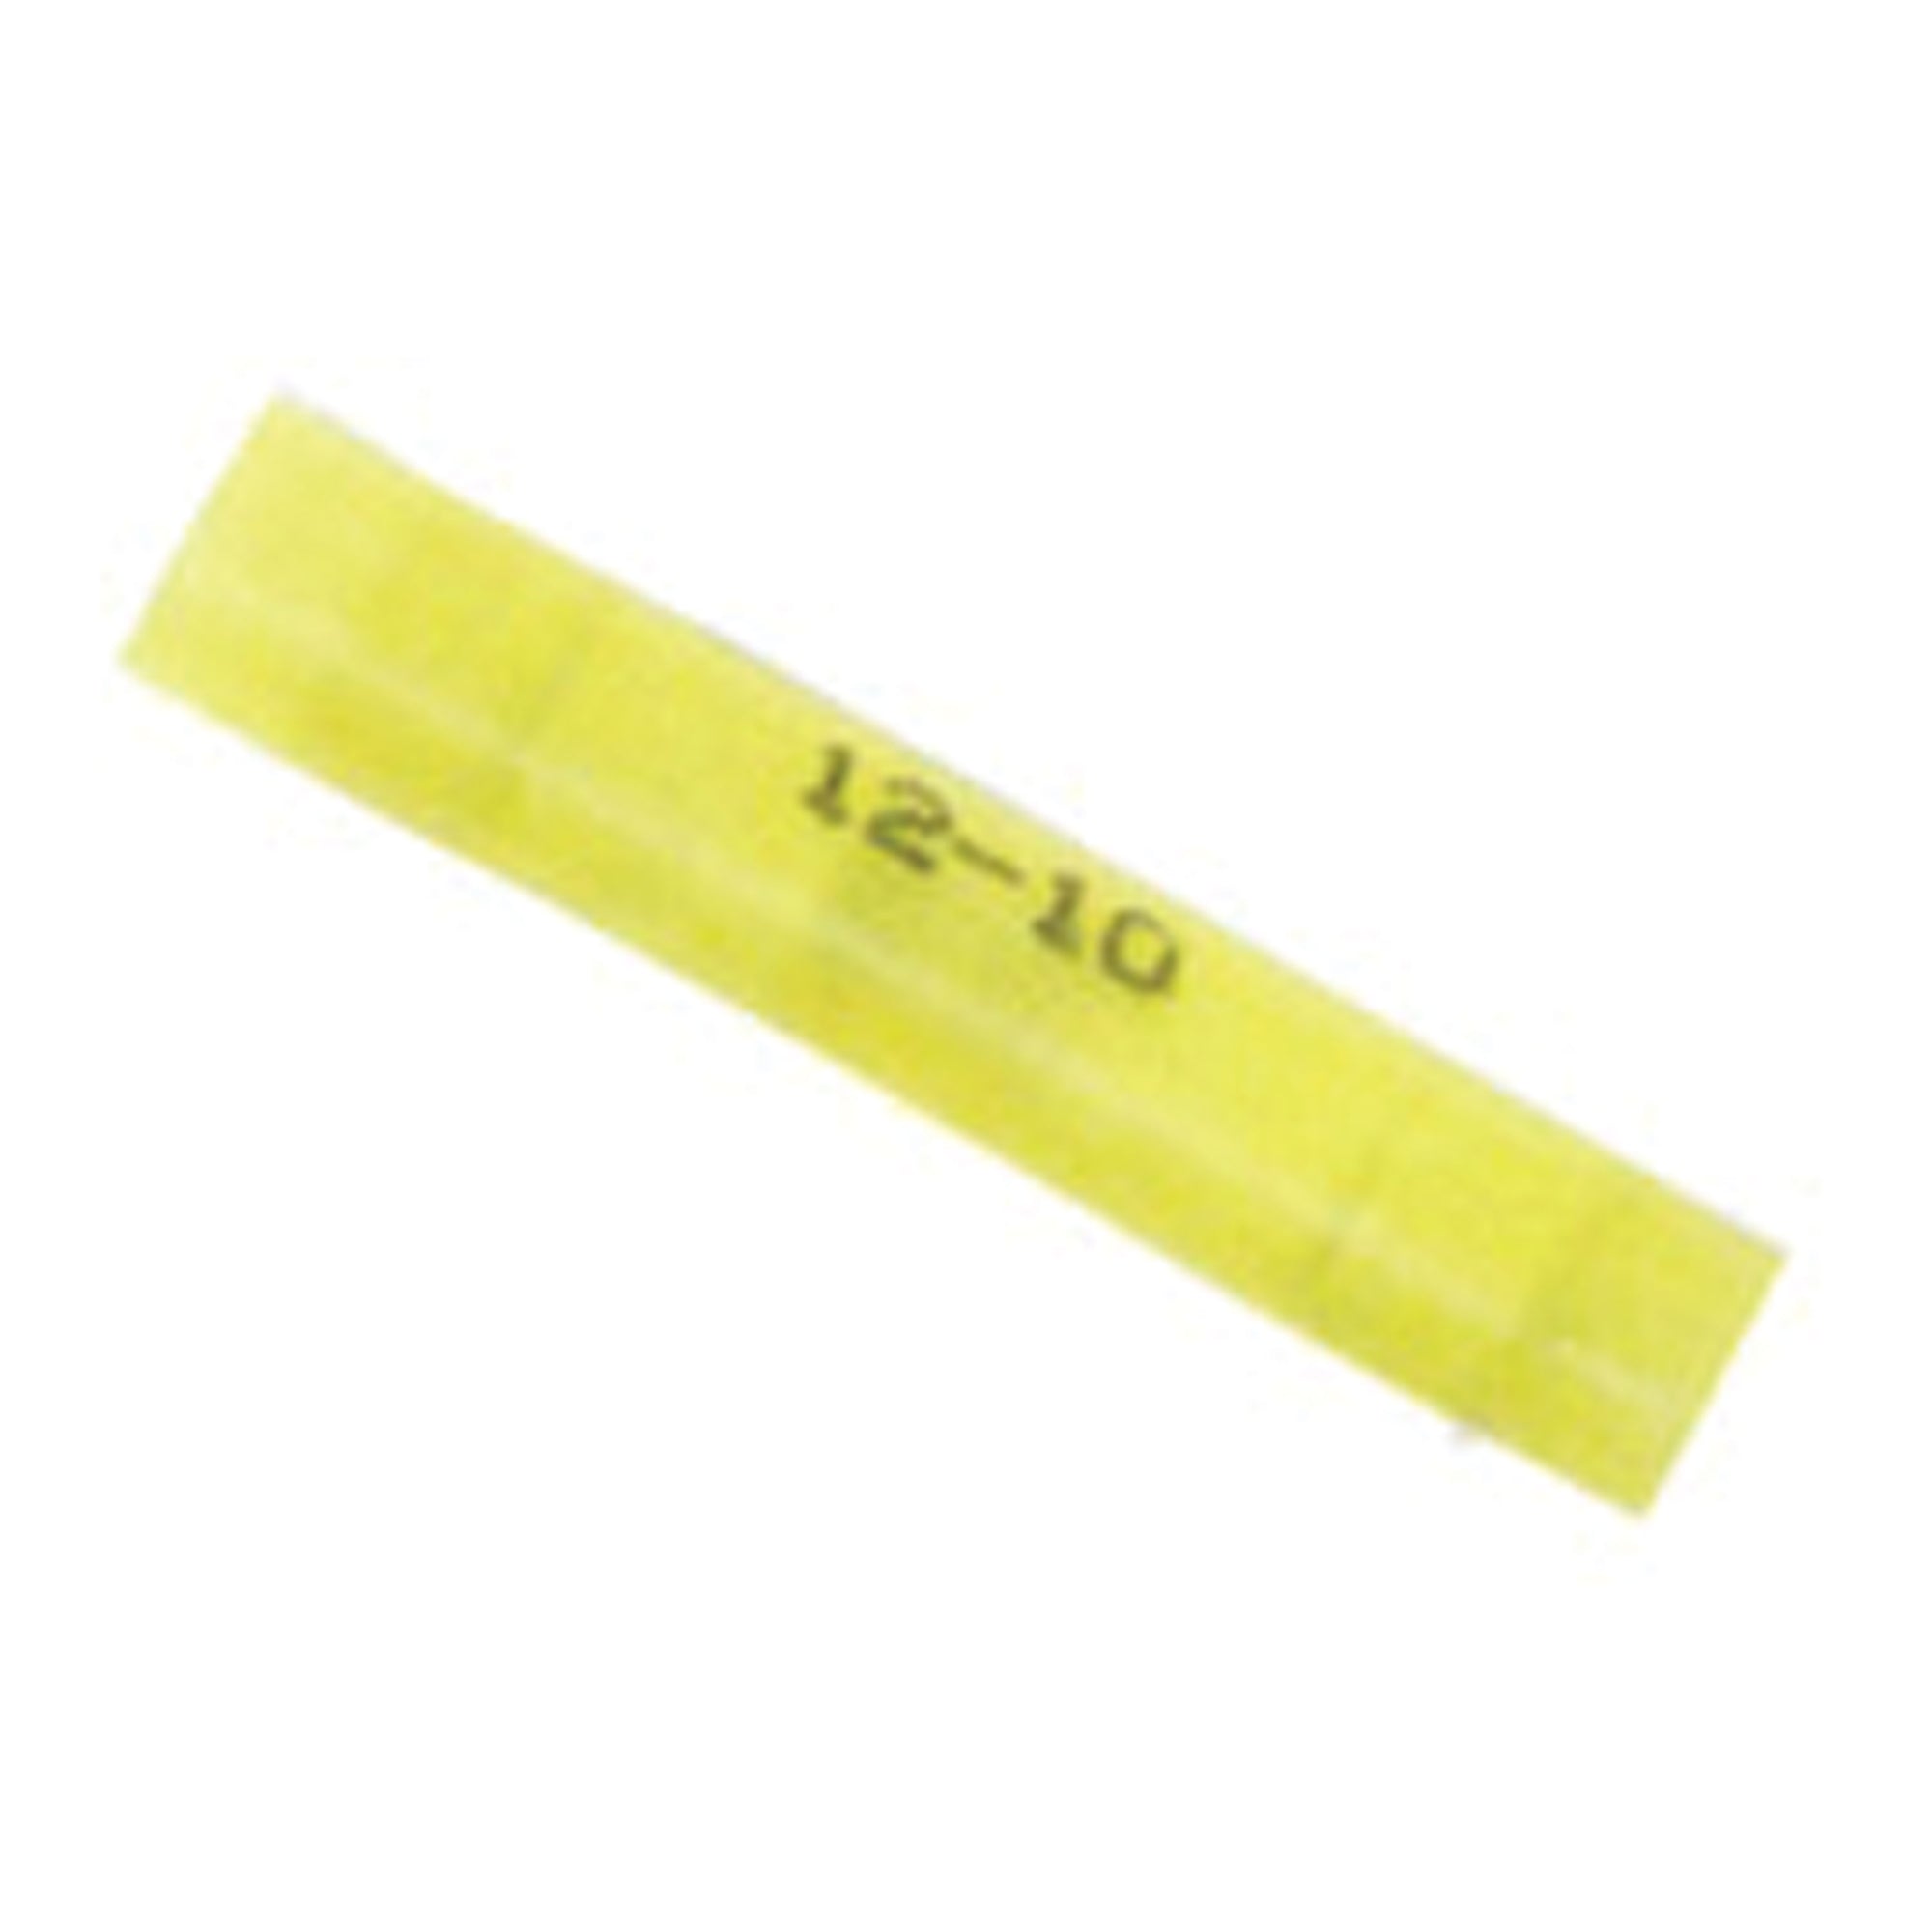 Ancor 220120 Marine Grade Butt Connector - 12-10, Yellow, Pack of 100